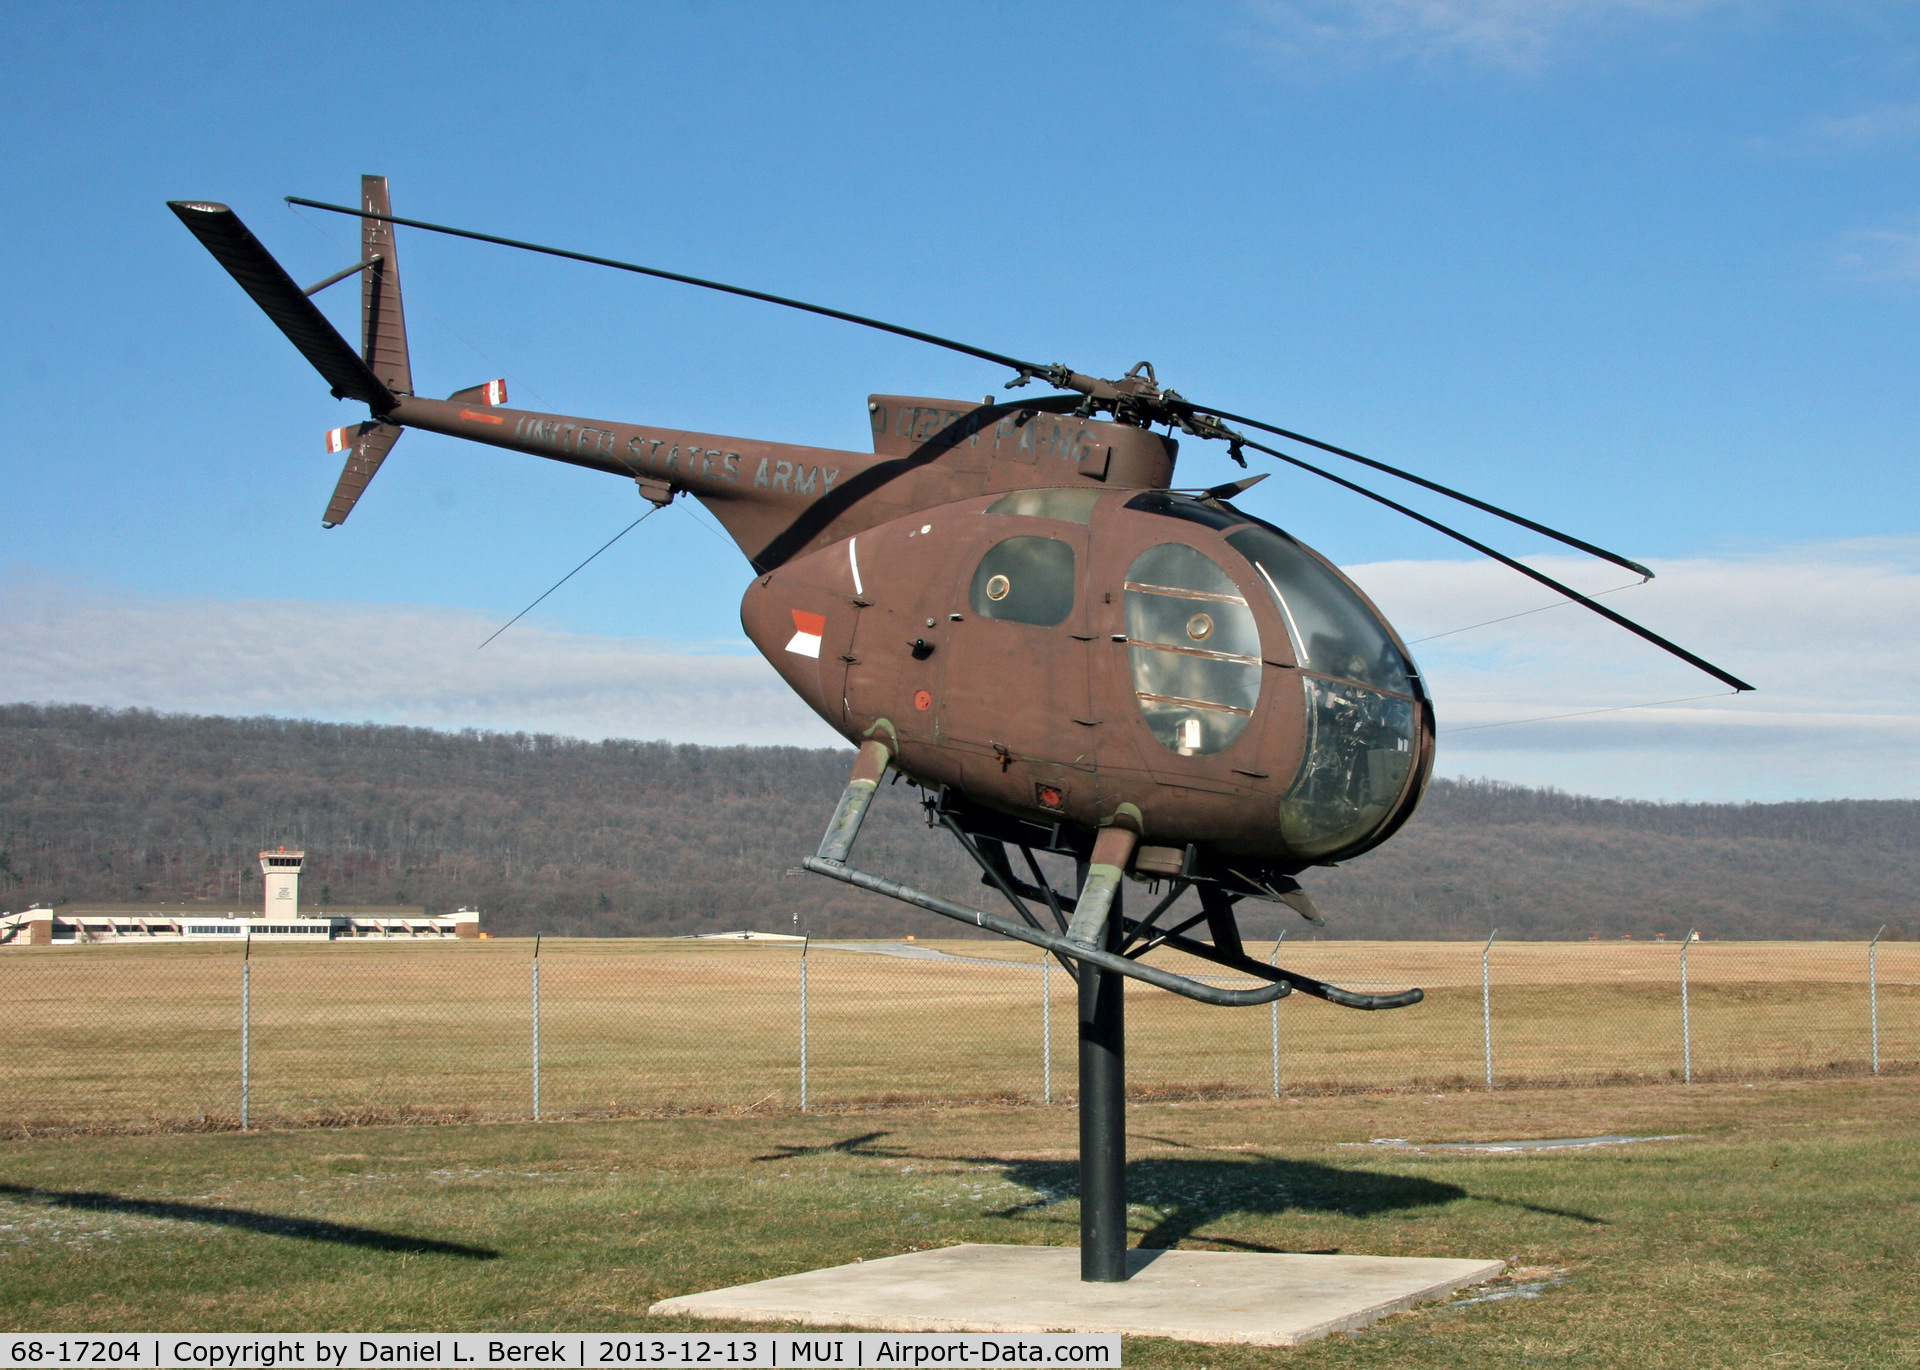 68-17204, 1968 Hughes OH-6A Cayuse C/N 1164, This helicopter is now on display at the Pennsylvania National Guard Military Museum, Fort Indiantown Gap.